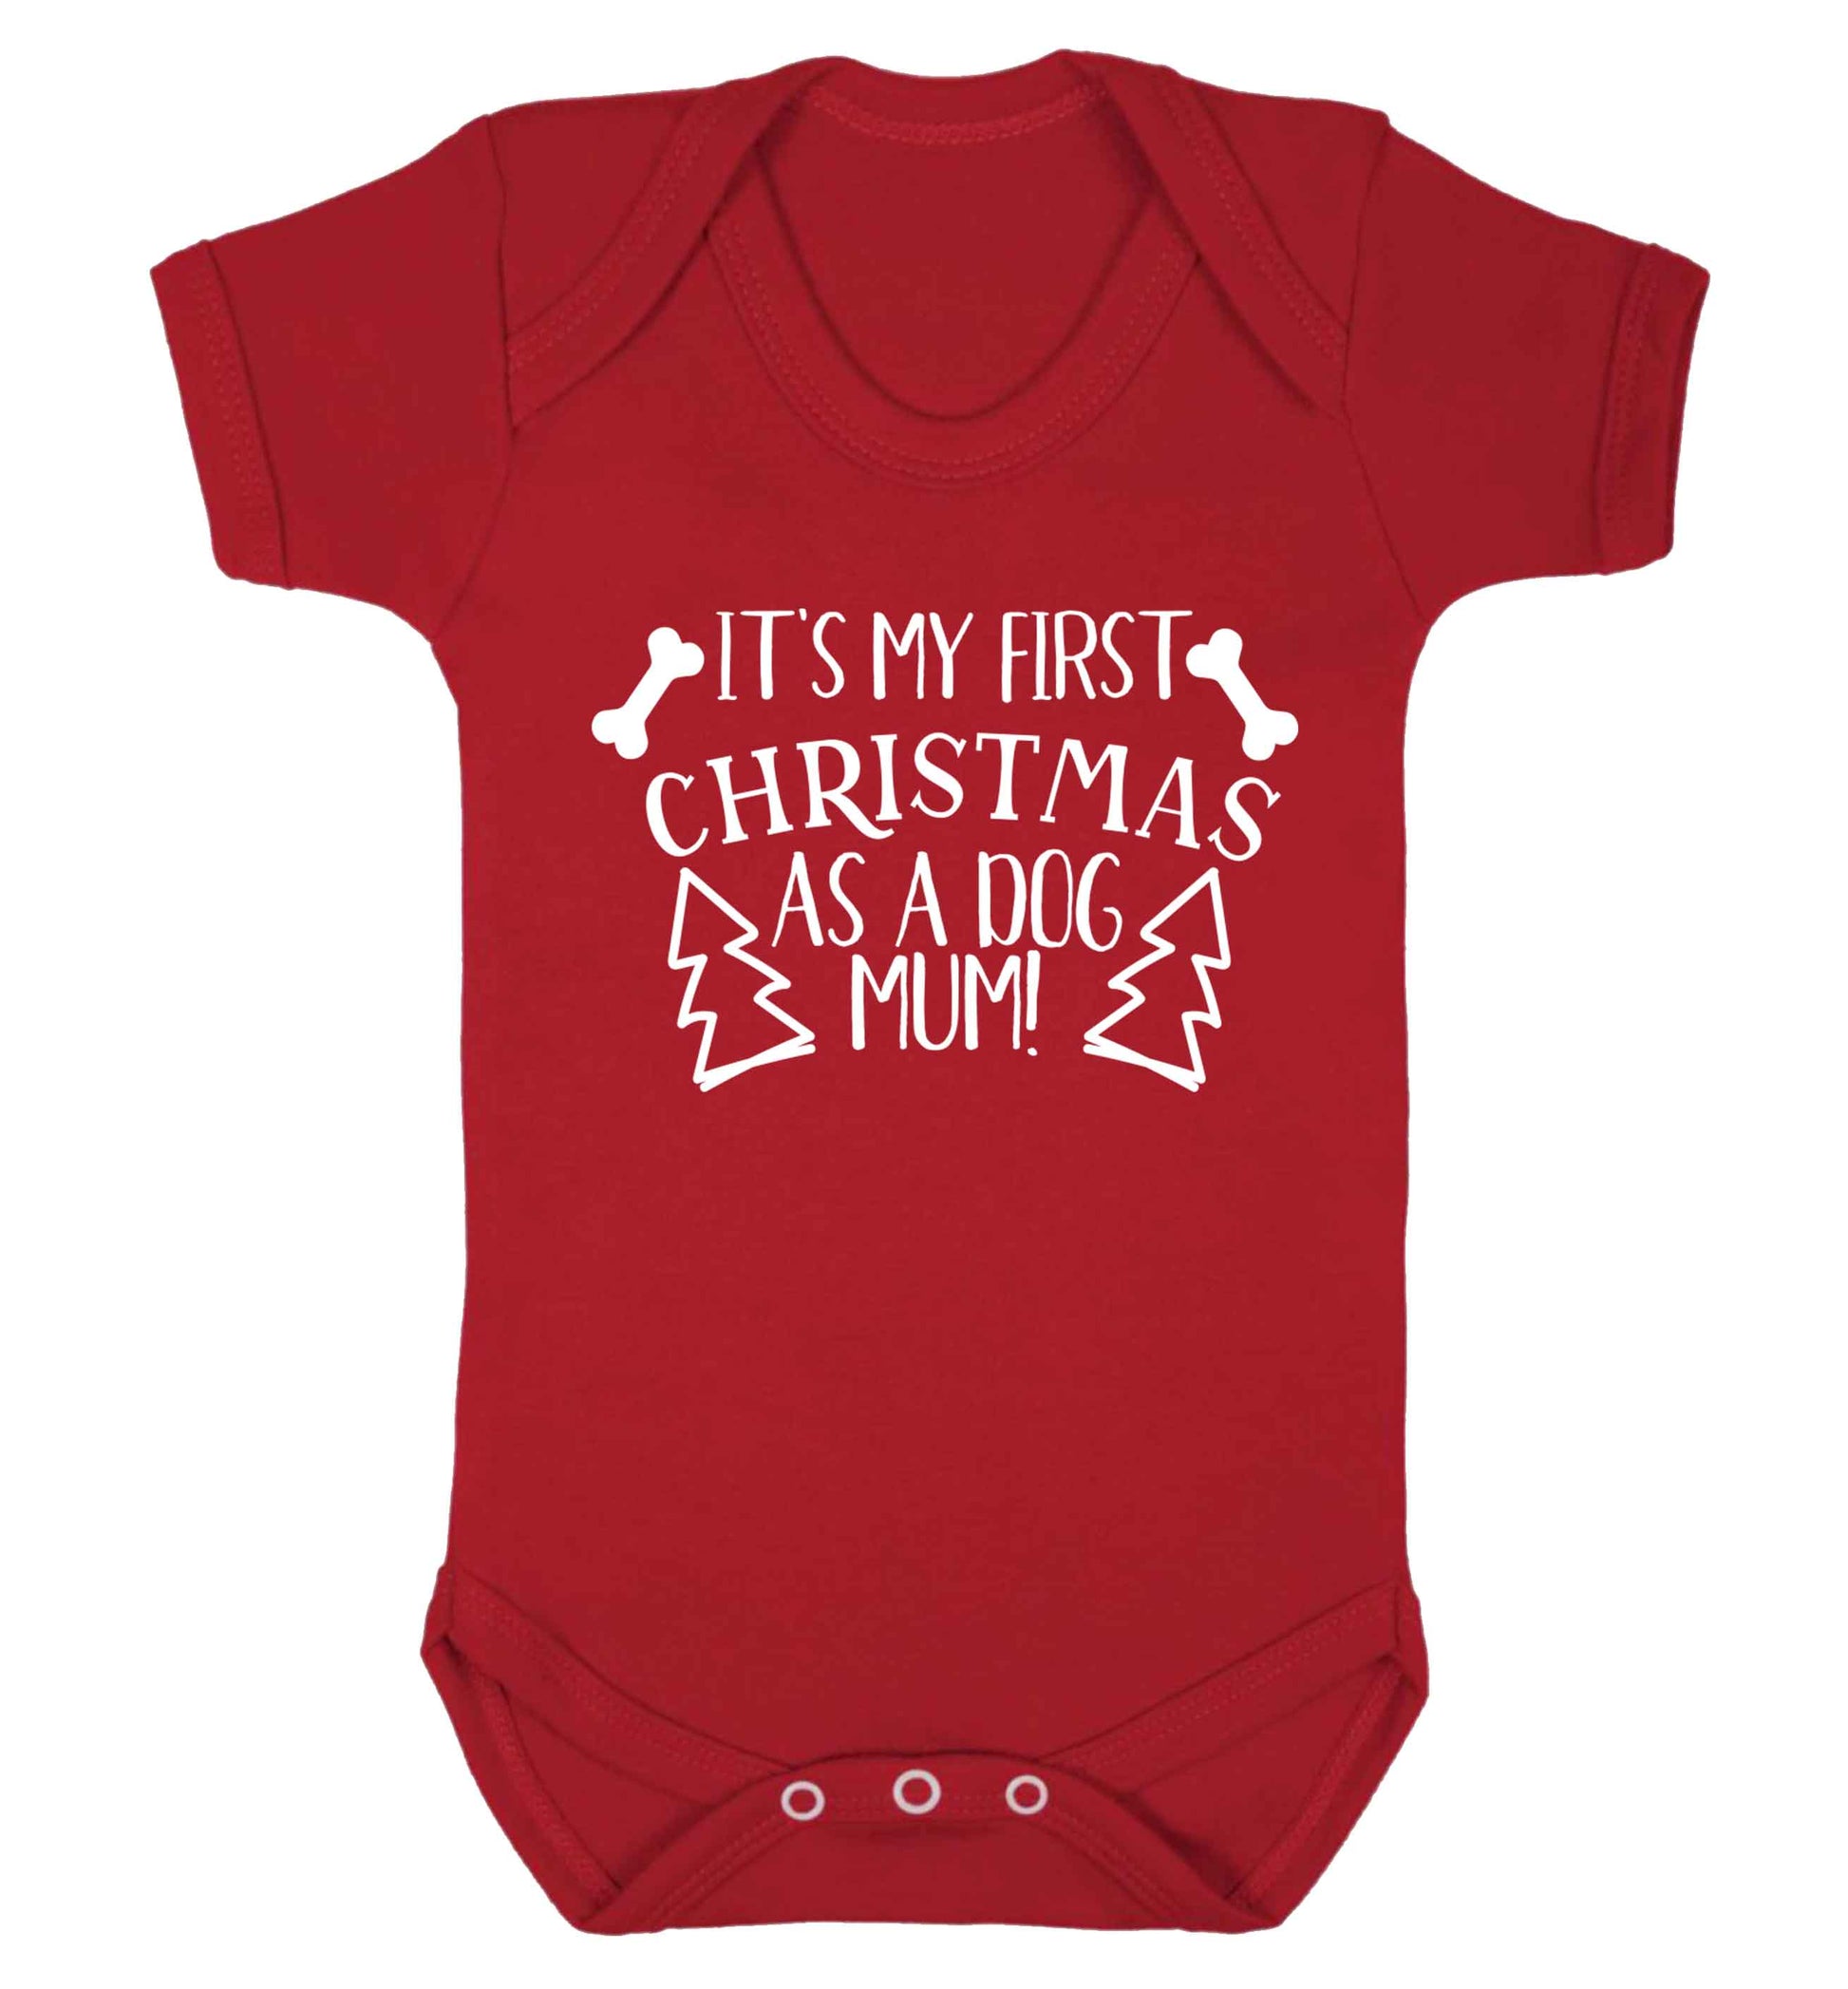 It's my first Christmas as a dog mum! Baby Vest red 18-24 months